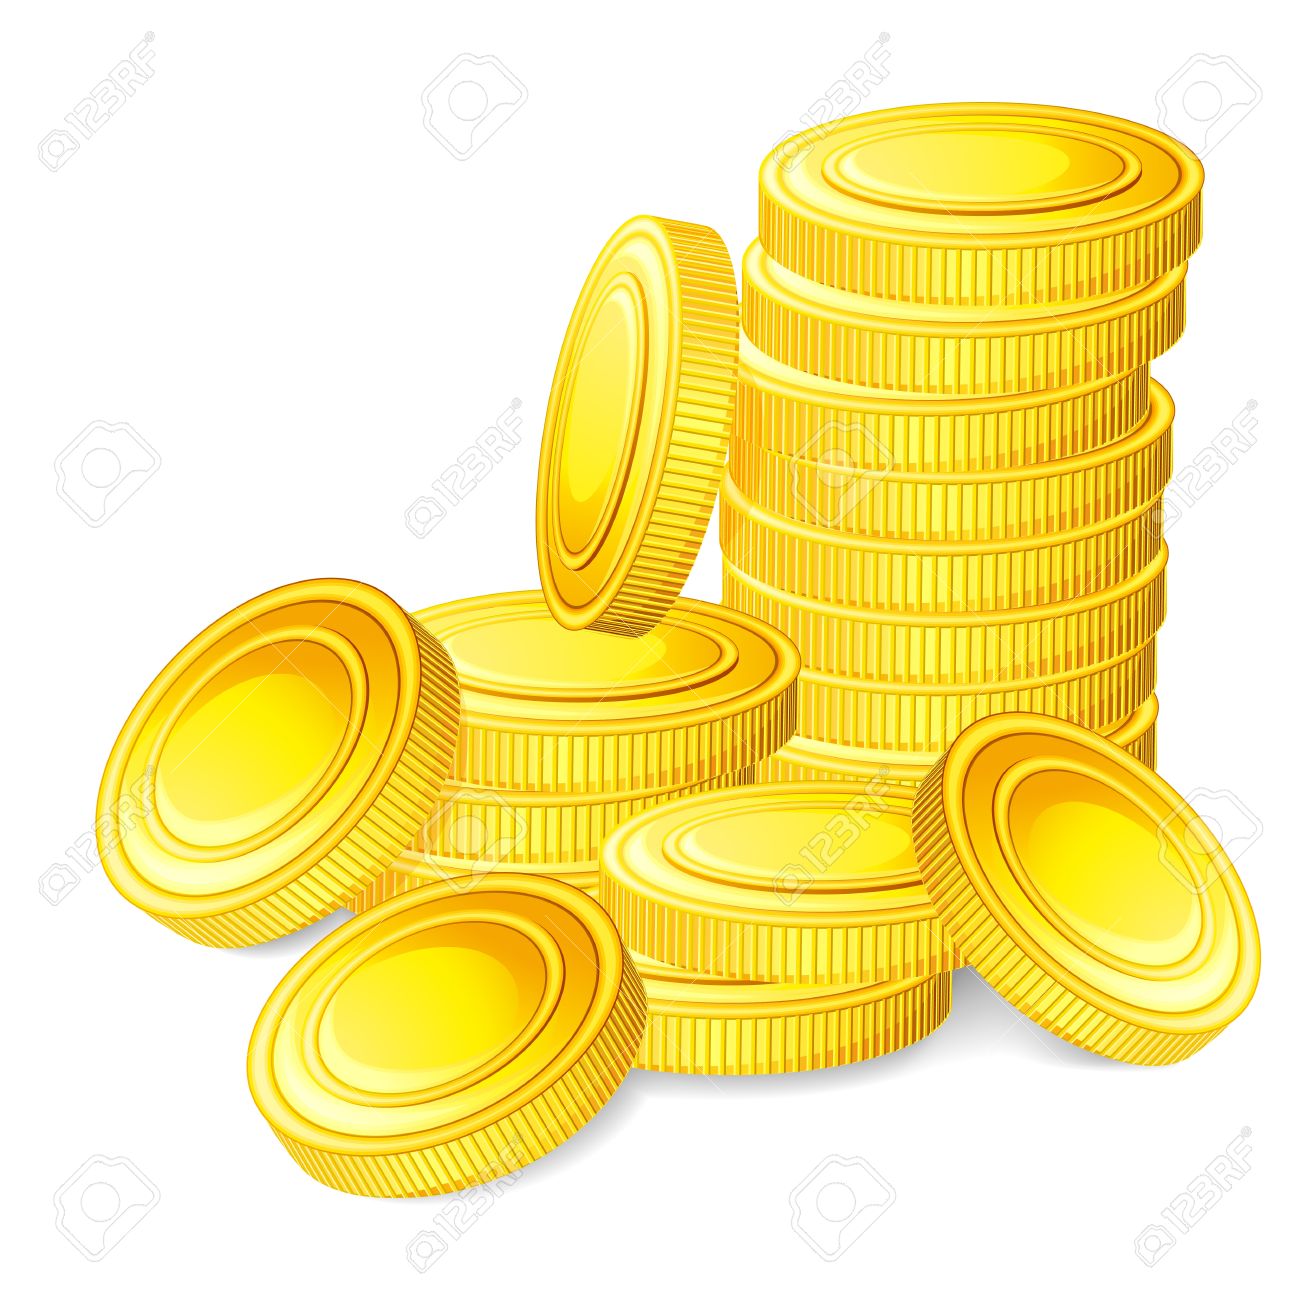 2886 Coin free clipart.